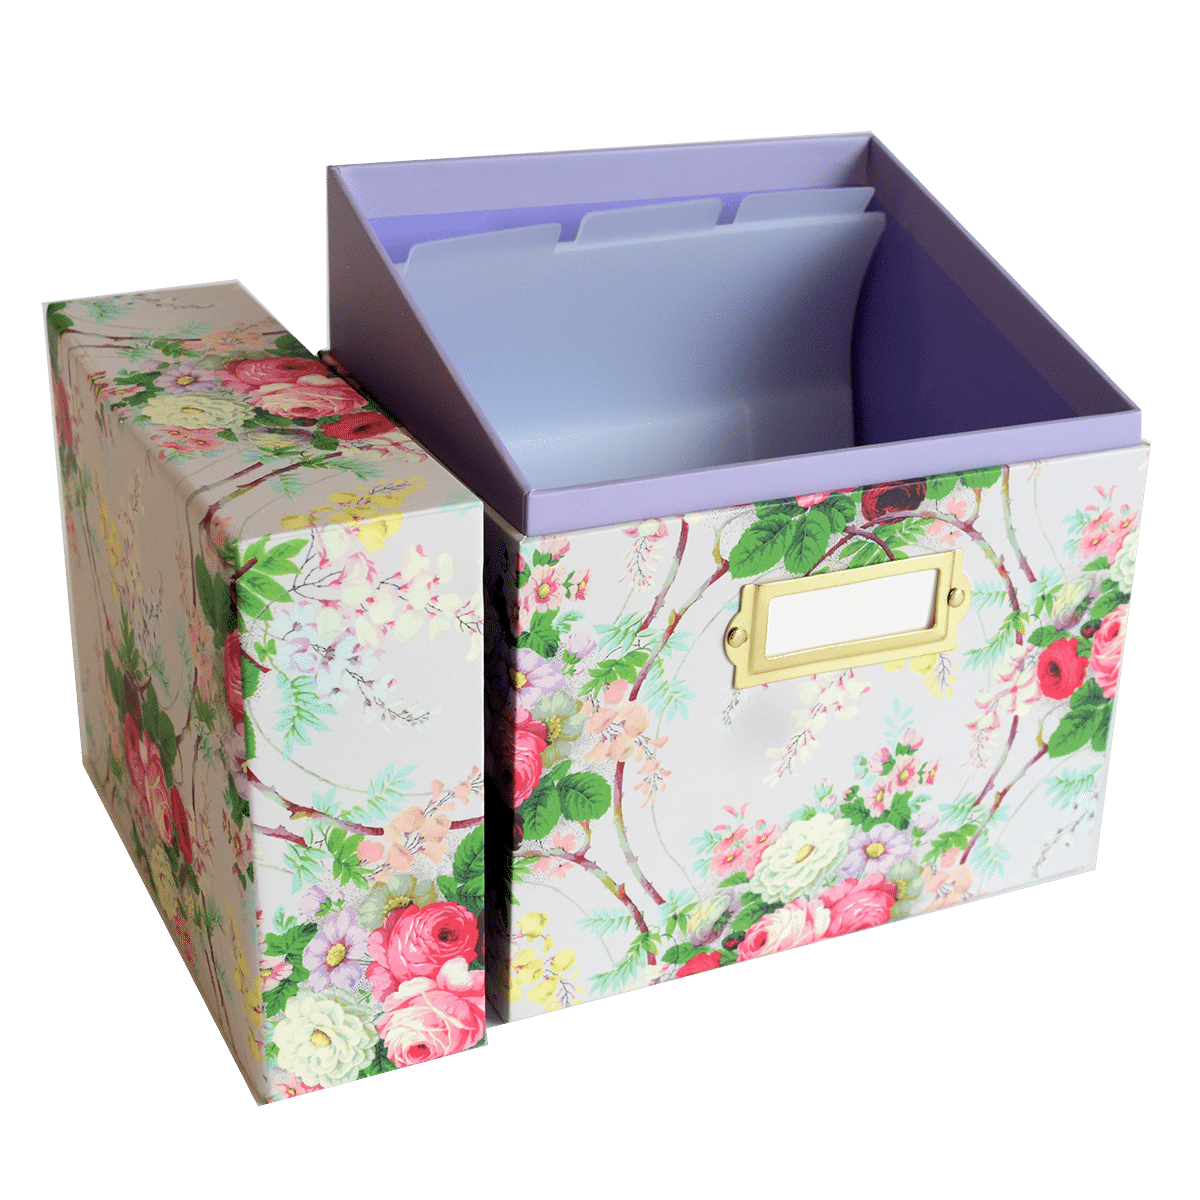 a flowered box with a purple lid.